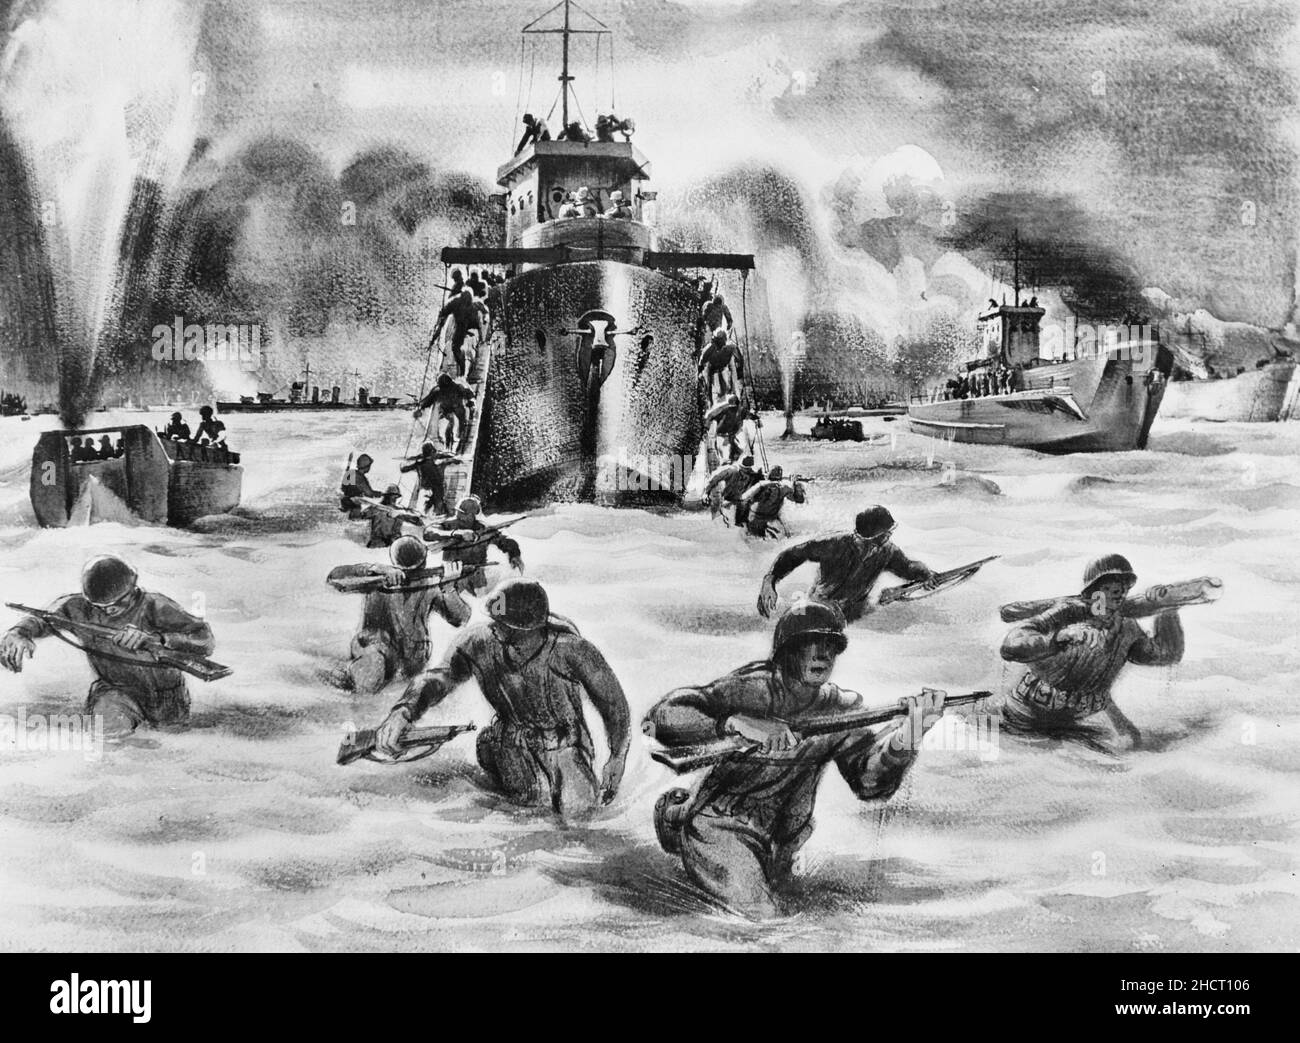 Assault wave, Salerno. Allied troops pour ashore at Salerno, wading through the surf under heavy machine gun and shell fire from hidden enemy positions back of the beaches. One of the landing craft is set aflame by an enemy shell. Another shell just misses an LCVP (landing craft, vehicle personnel) and sends up a plume of smoke and water. Allied cruisers come in close to shore to blast the enemy whose positions are relayed by naval spotters advancing with the landing parties - World War II Stock Photo